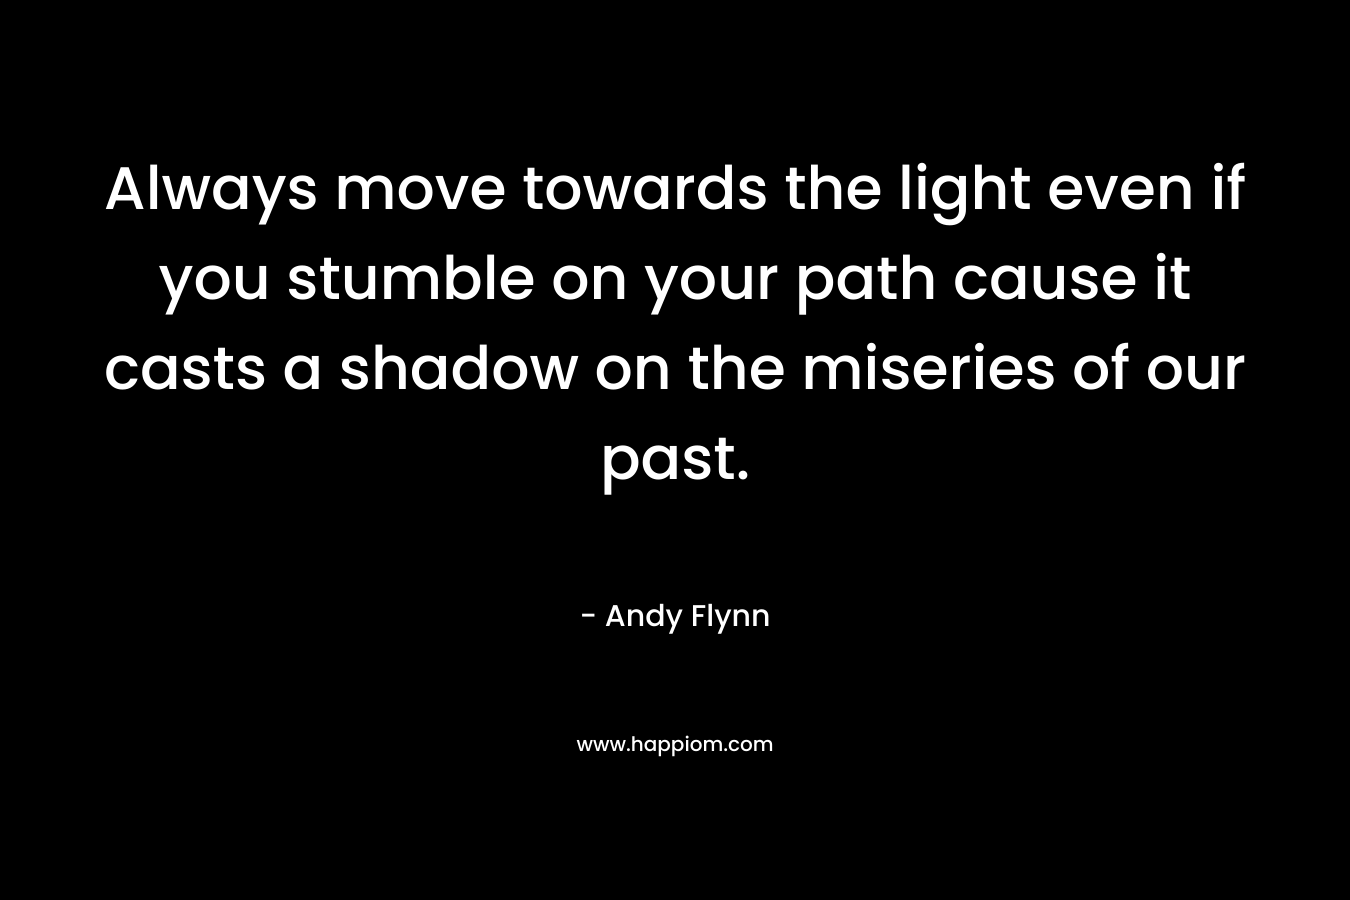 Always move towards the light even if you stumble on your path cause it casts a shadow on the miseries of our past. – Andy Flynn